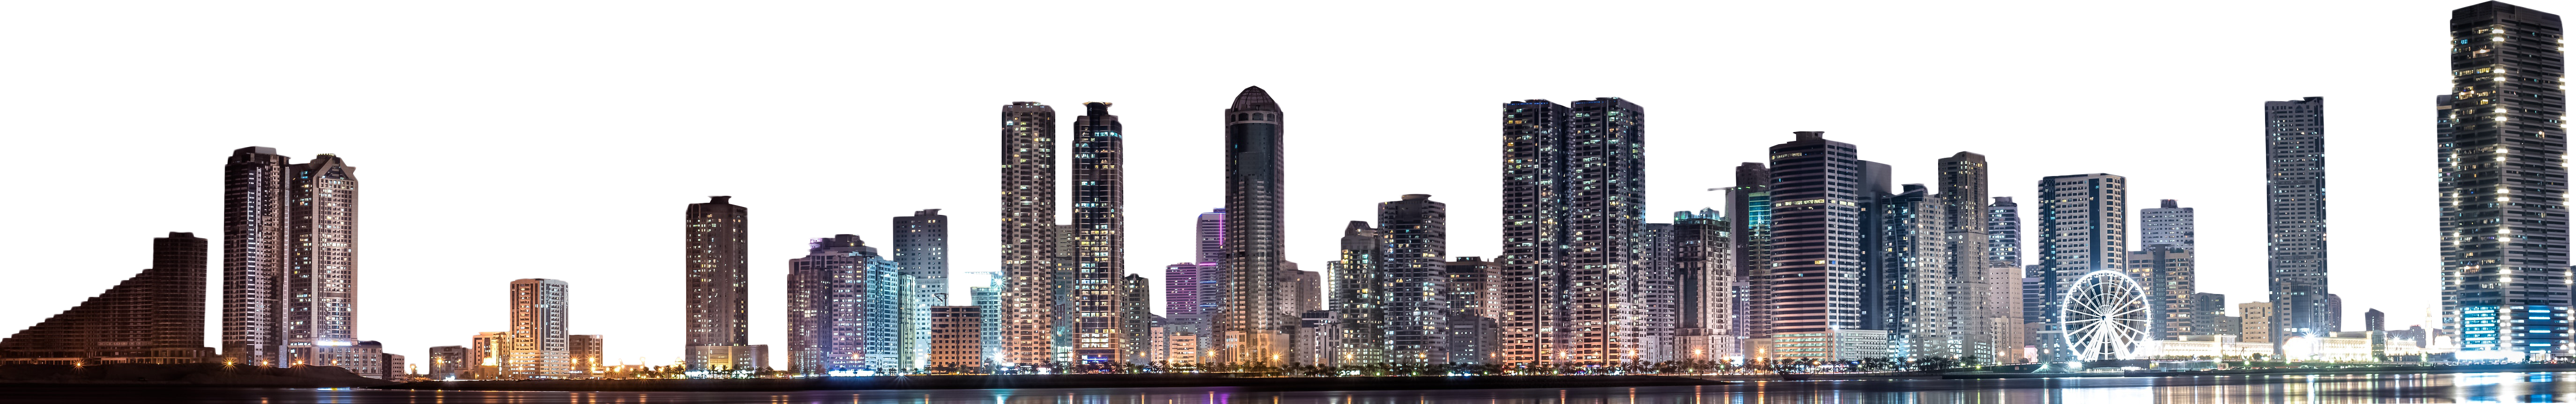 Skyline clipart large city. Wide night png image